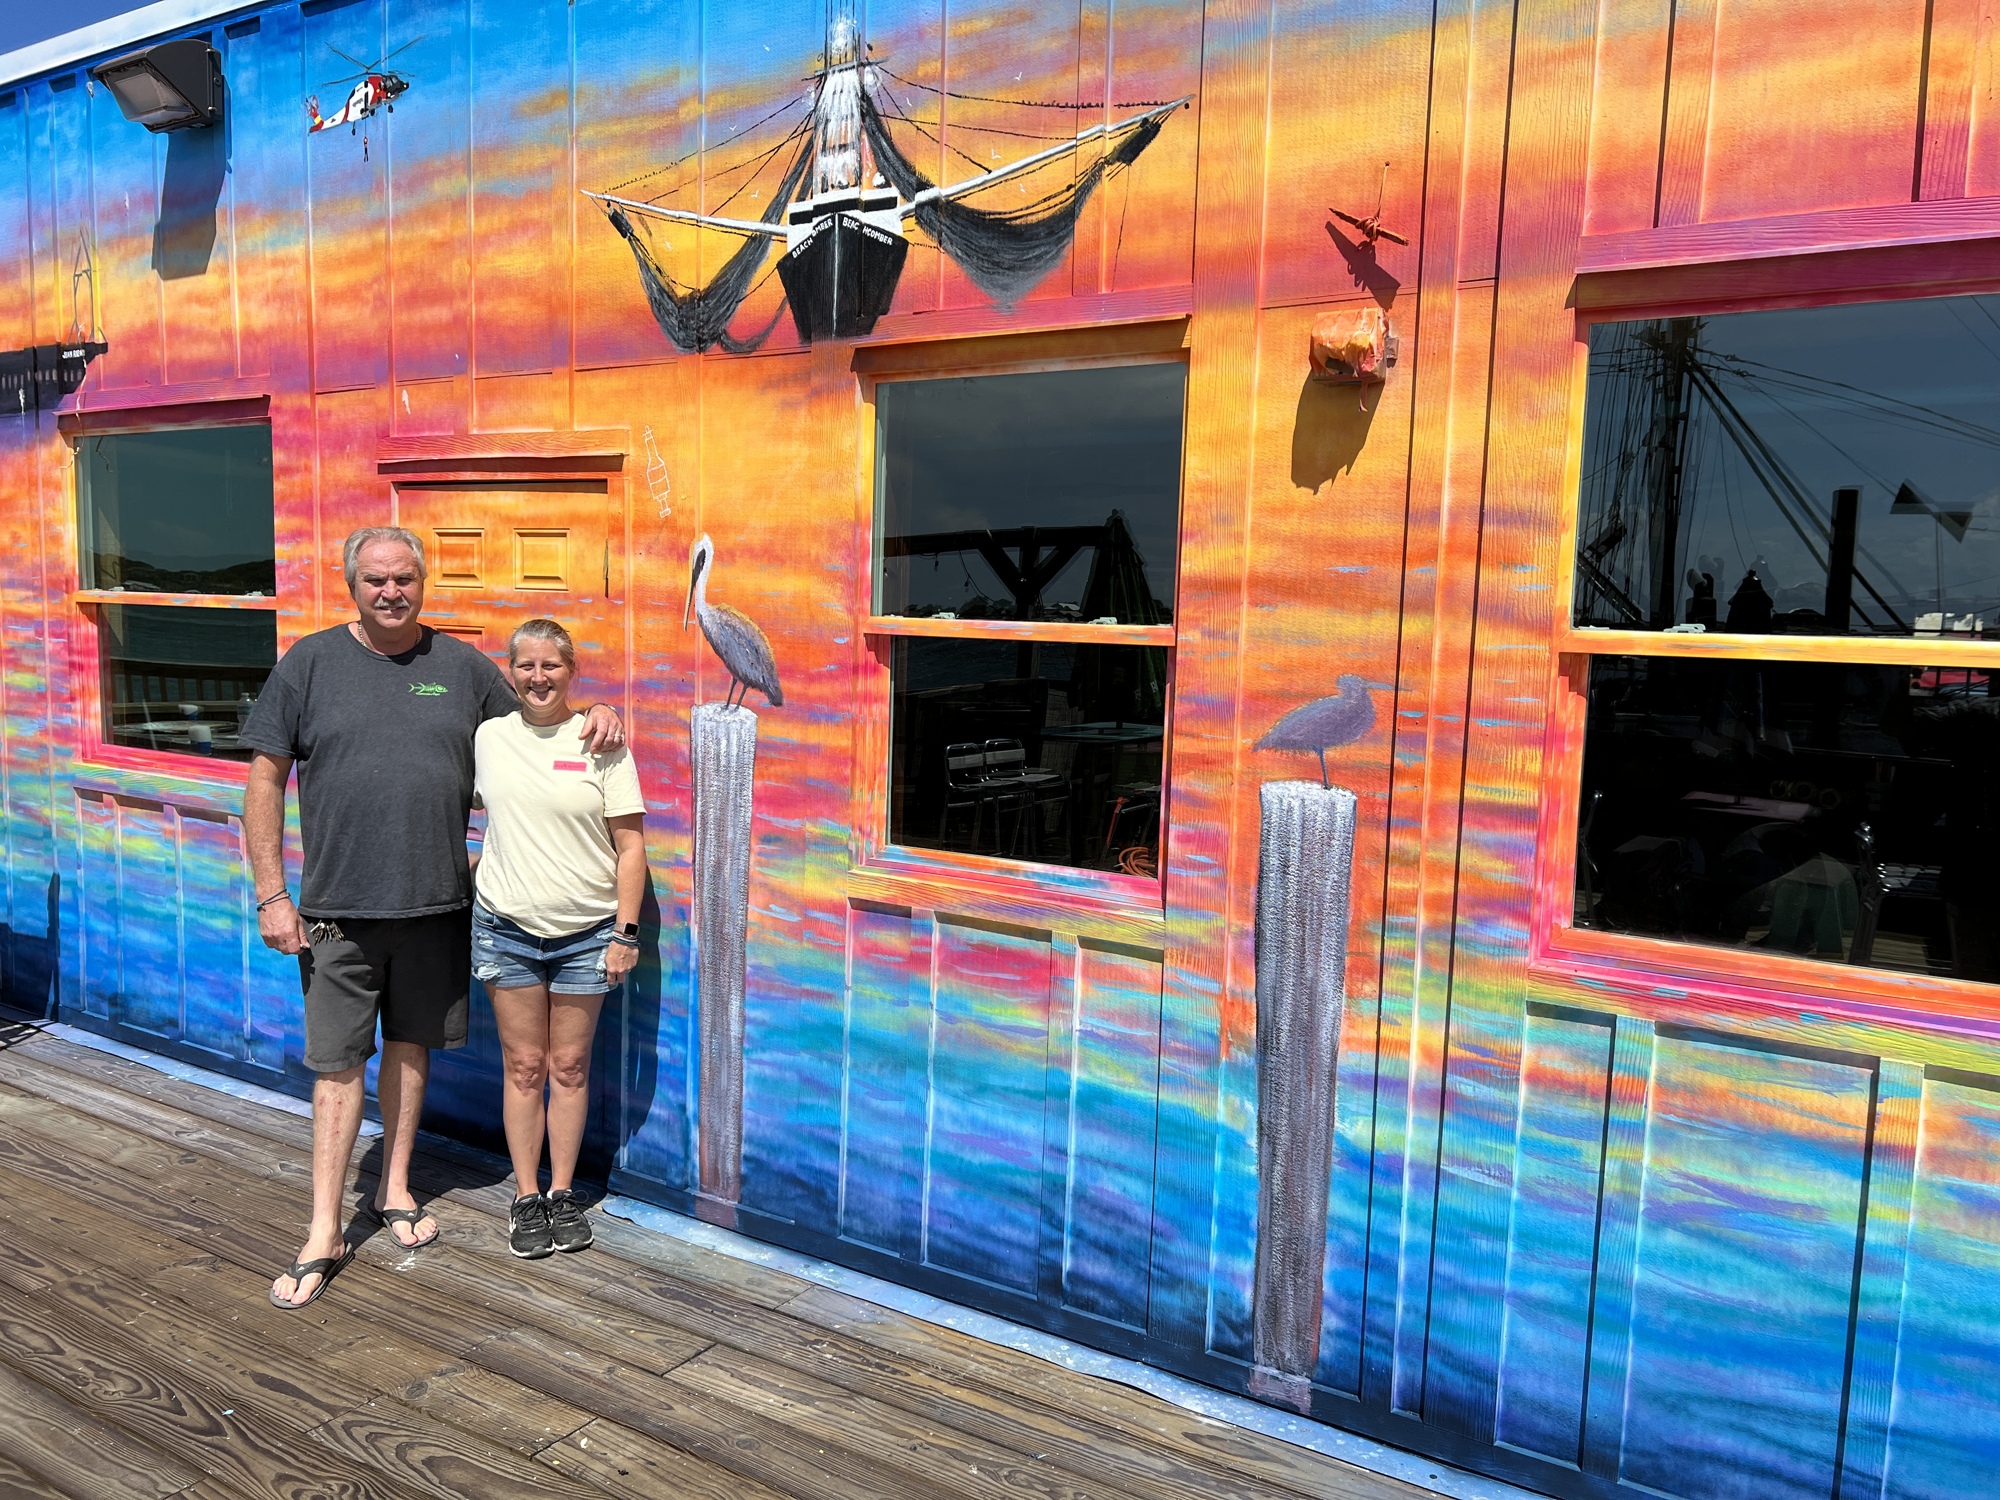 A mural depicting the Mayport fishing village is being painted by area artist Gary Mack.